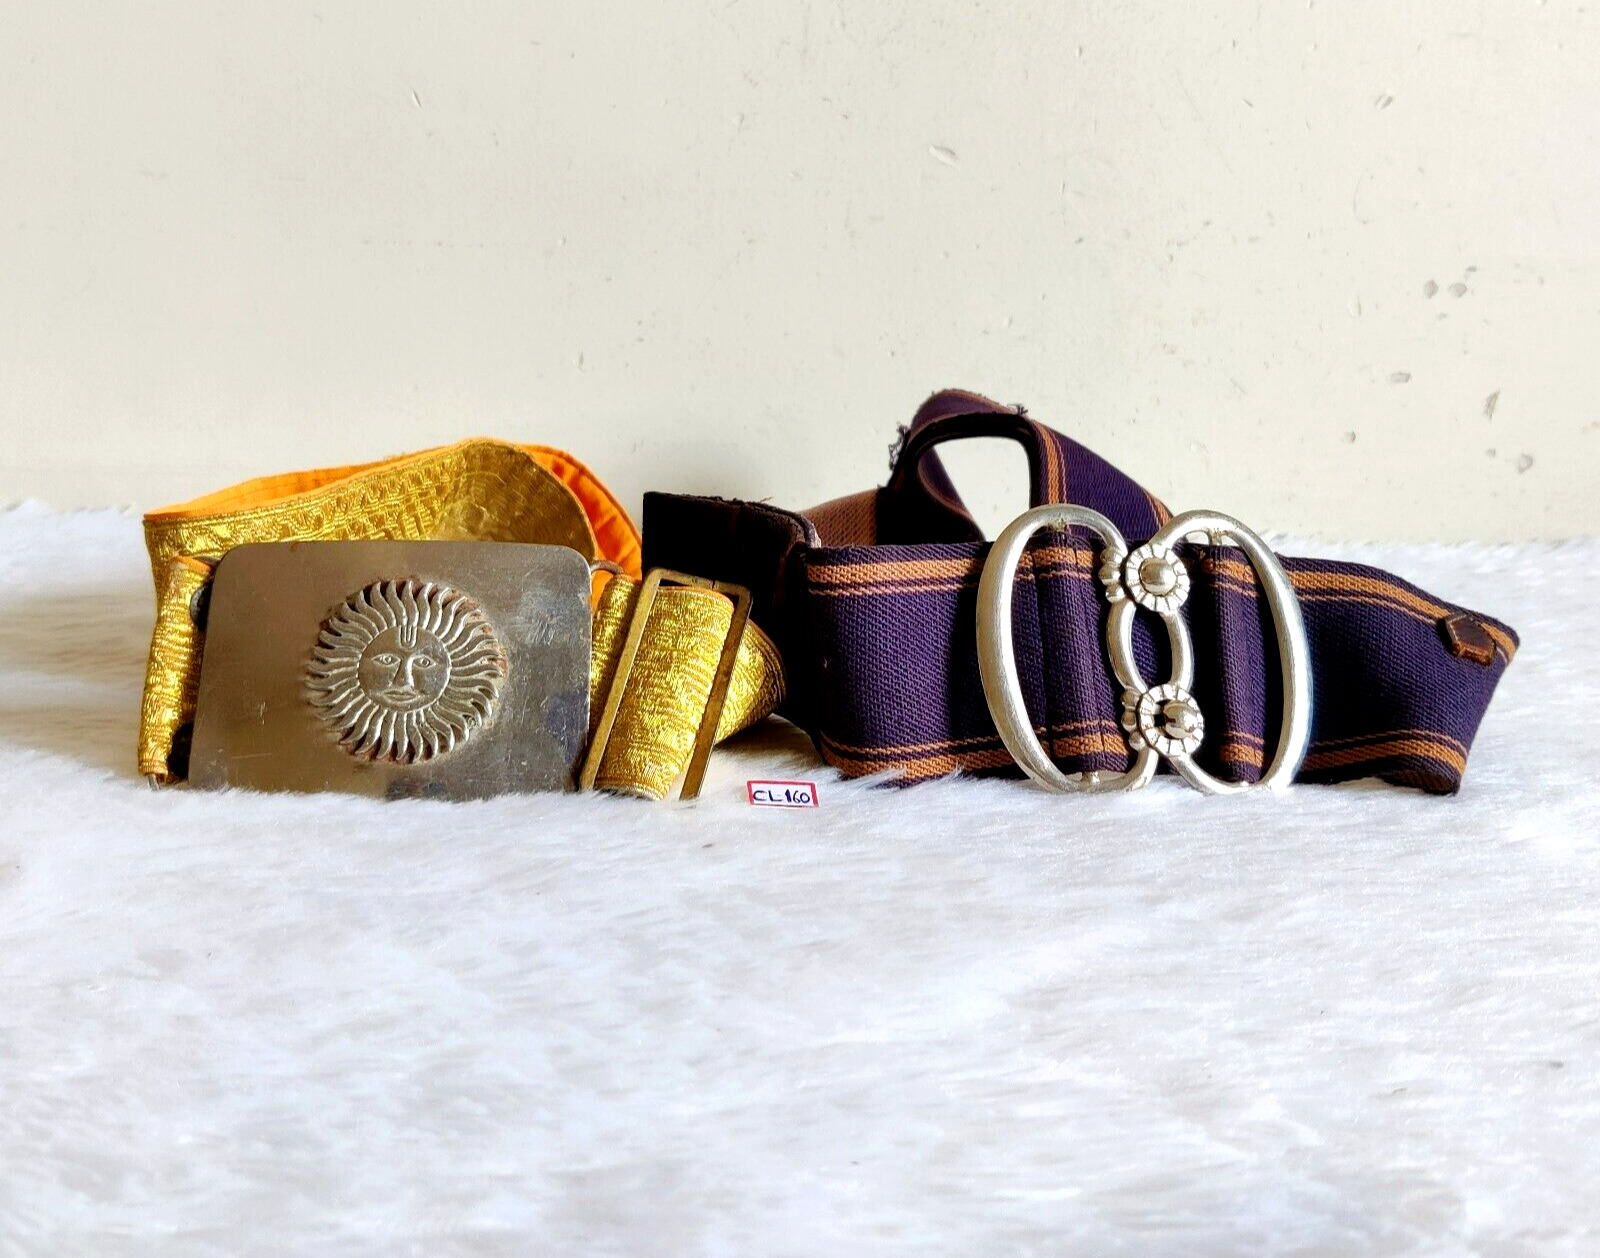 Vintage Sun Logo and Leather Old Buckle Cloth State Belt Set of 2 Rare CL160